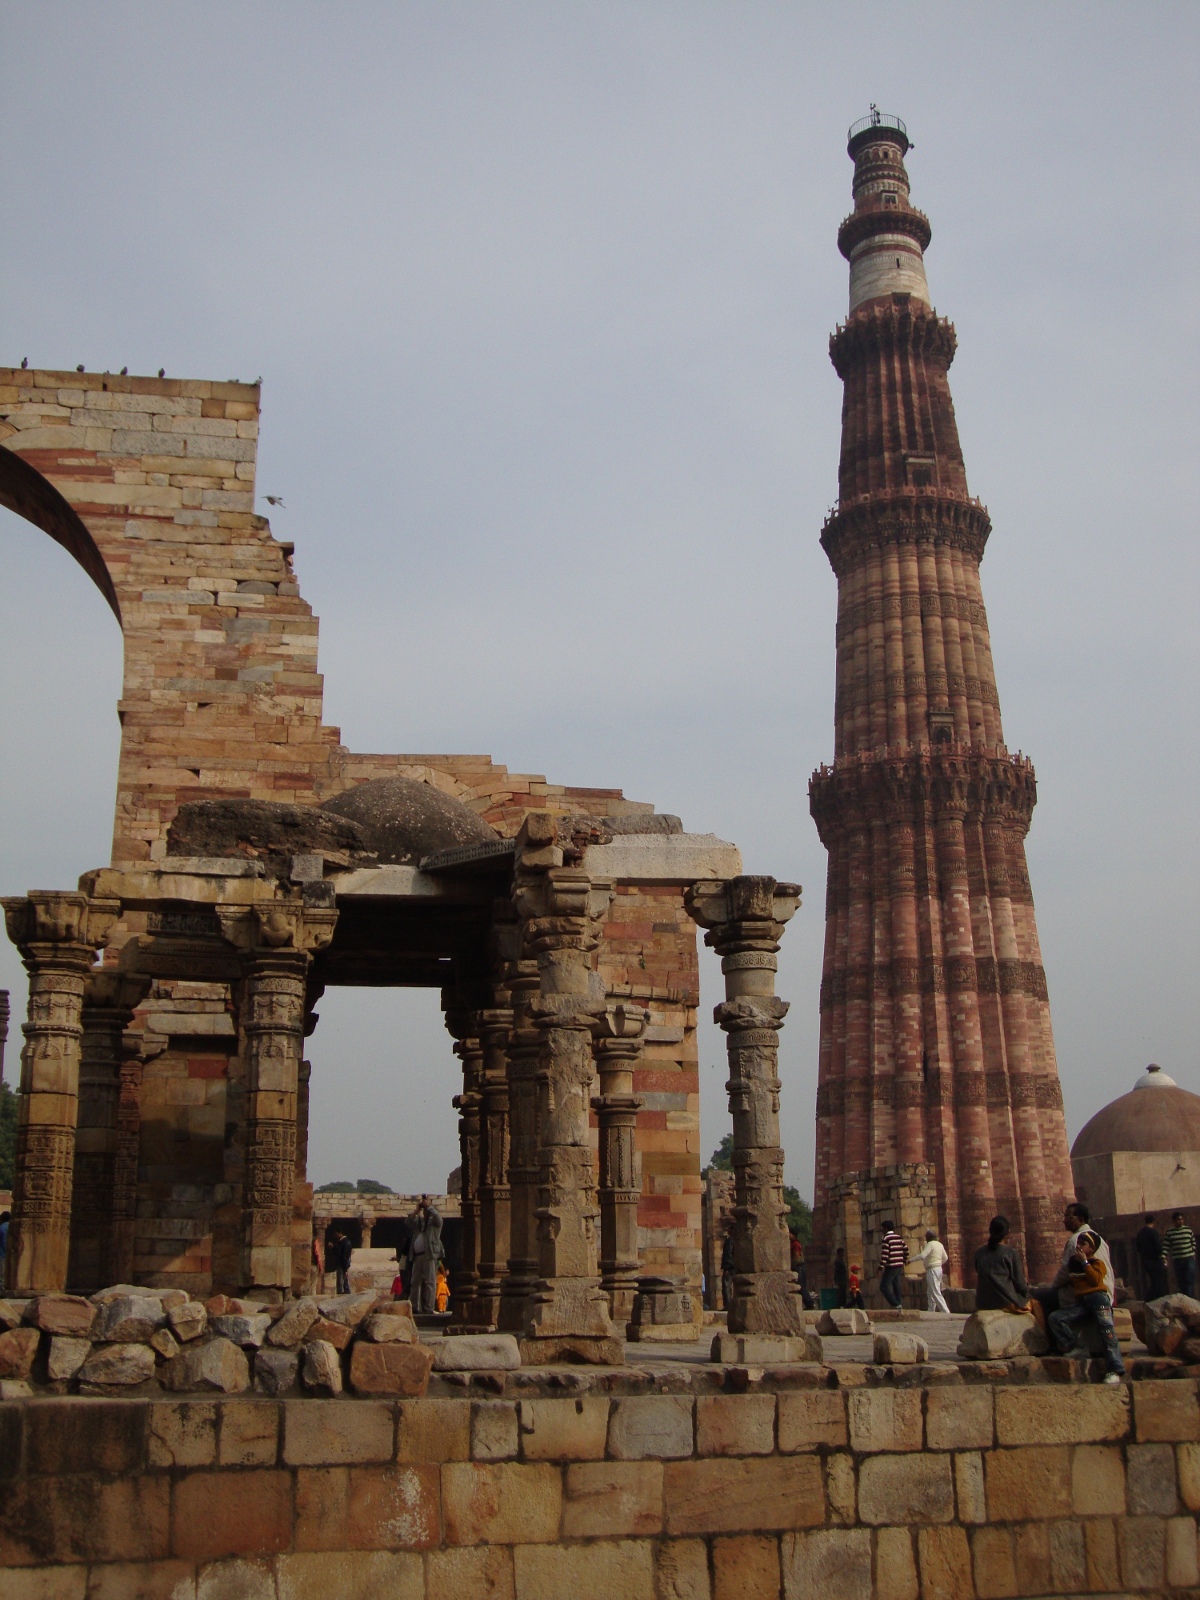 Qutb Minar towers over surrounding ruins in south Delhi.